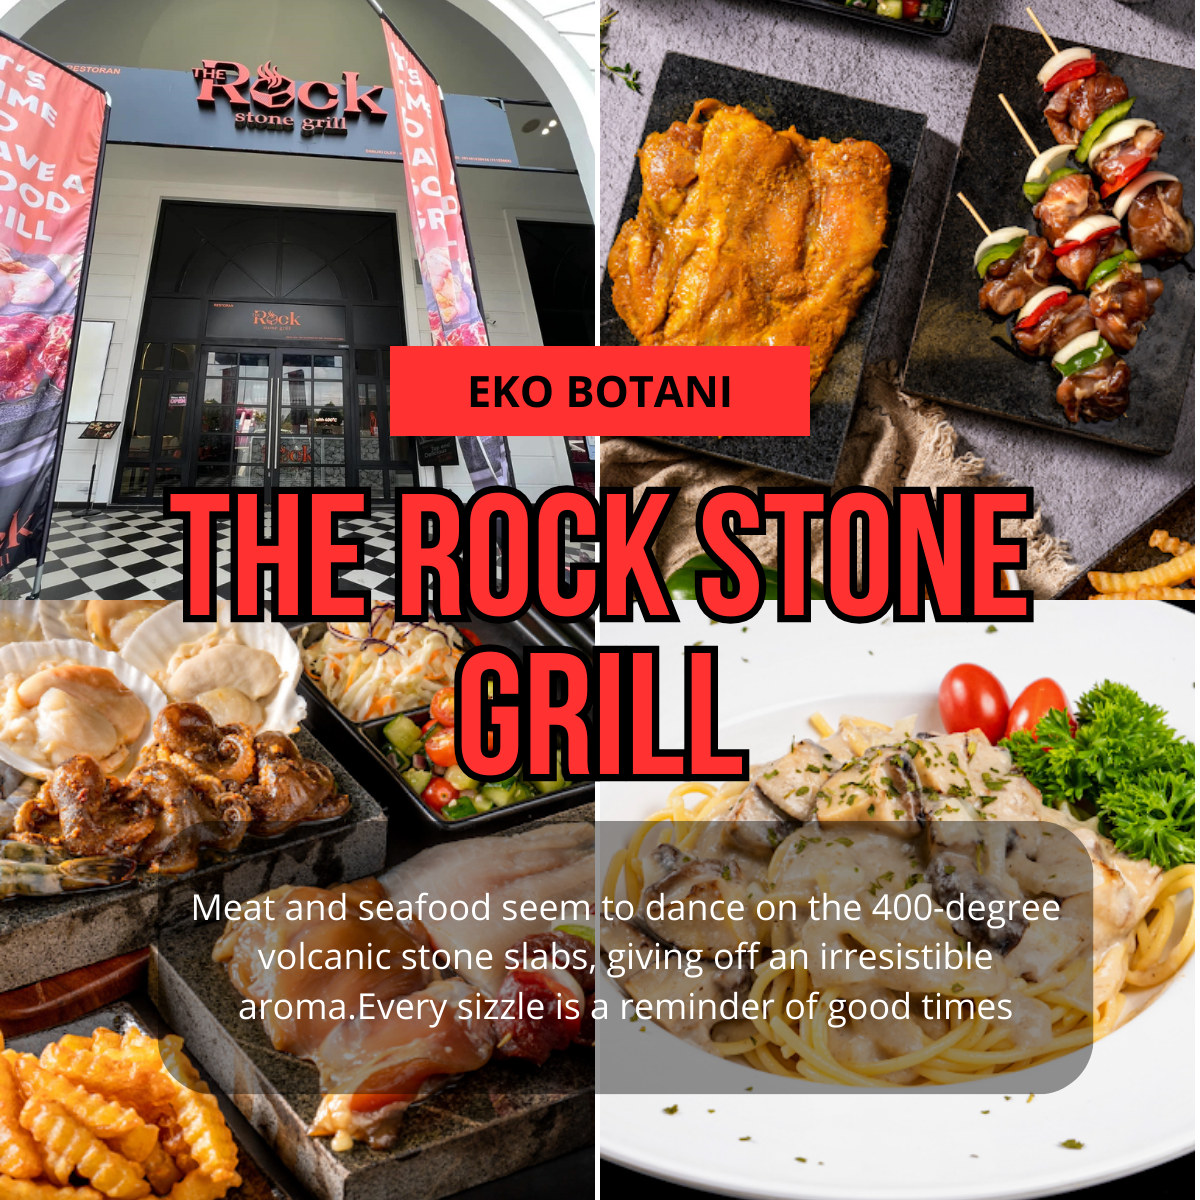 The rock stone grill